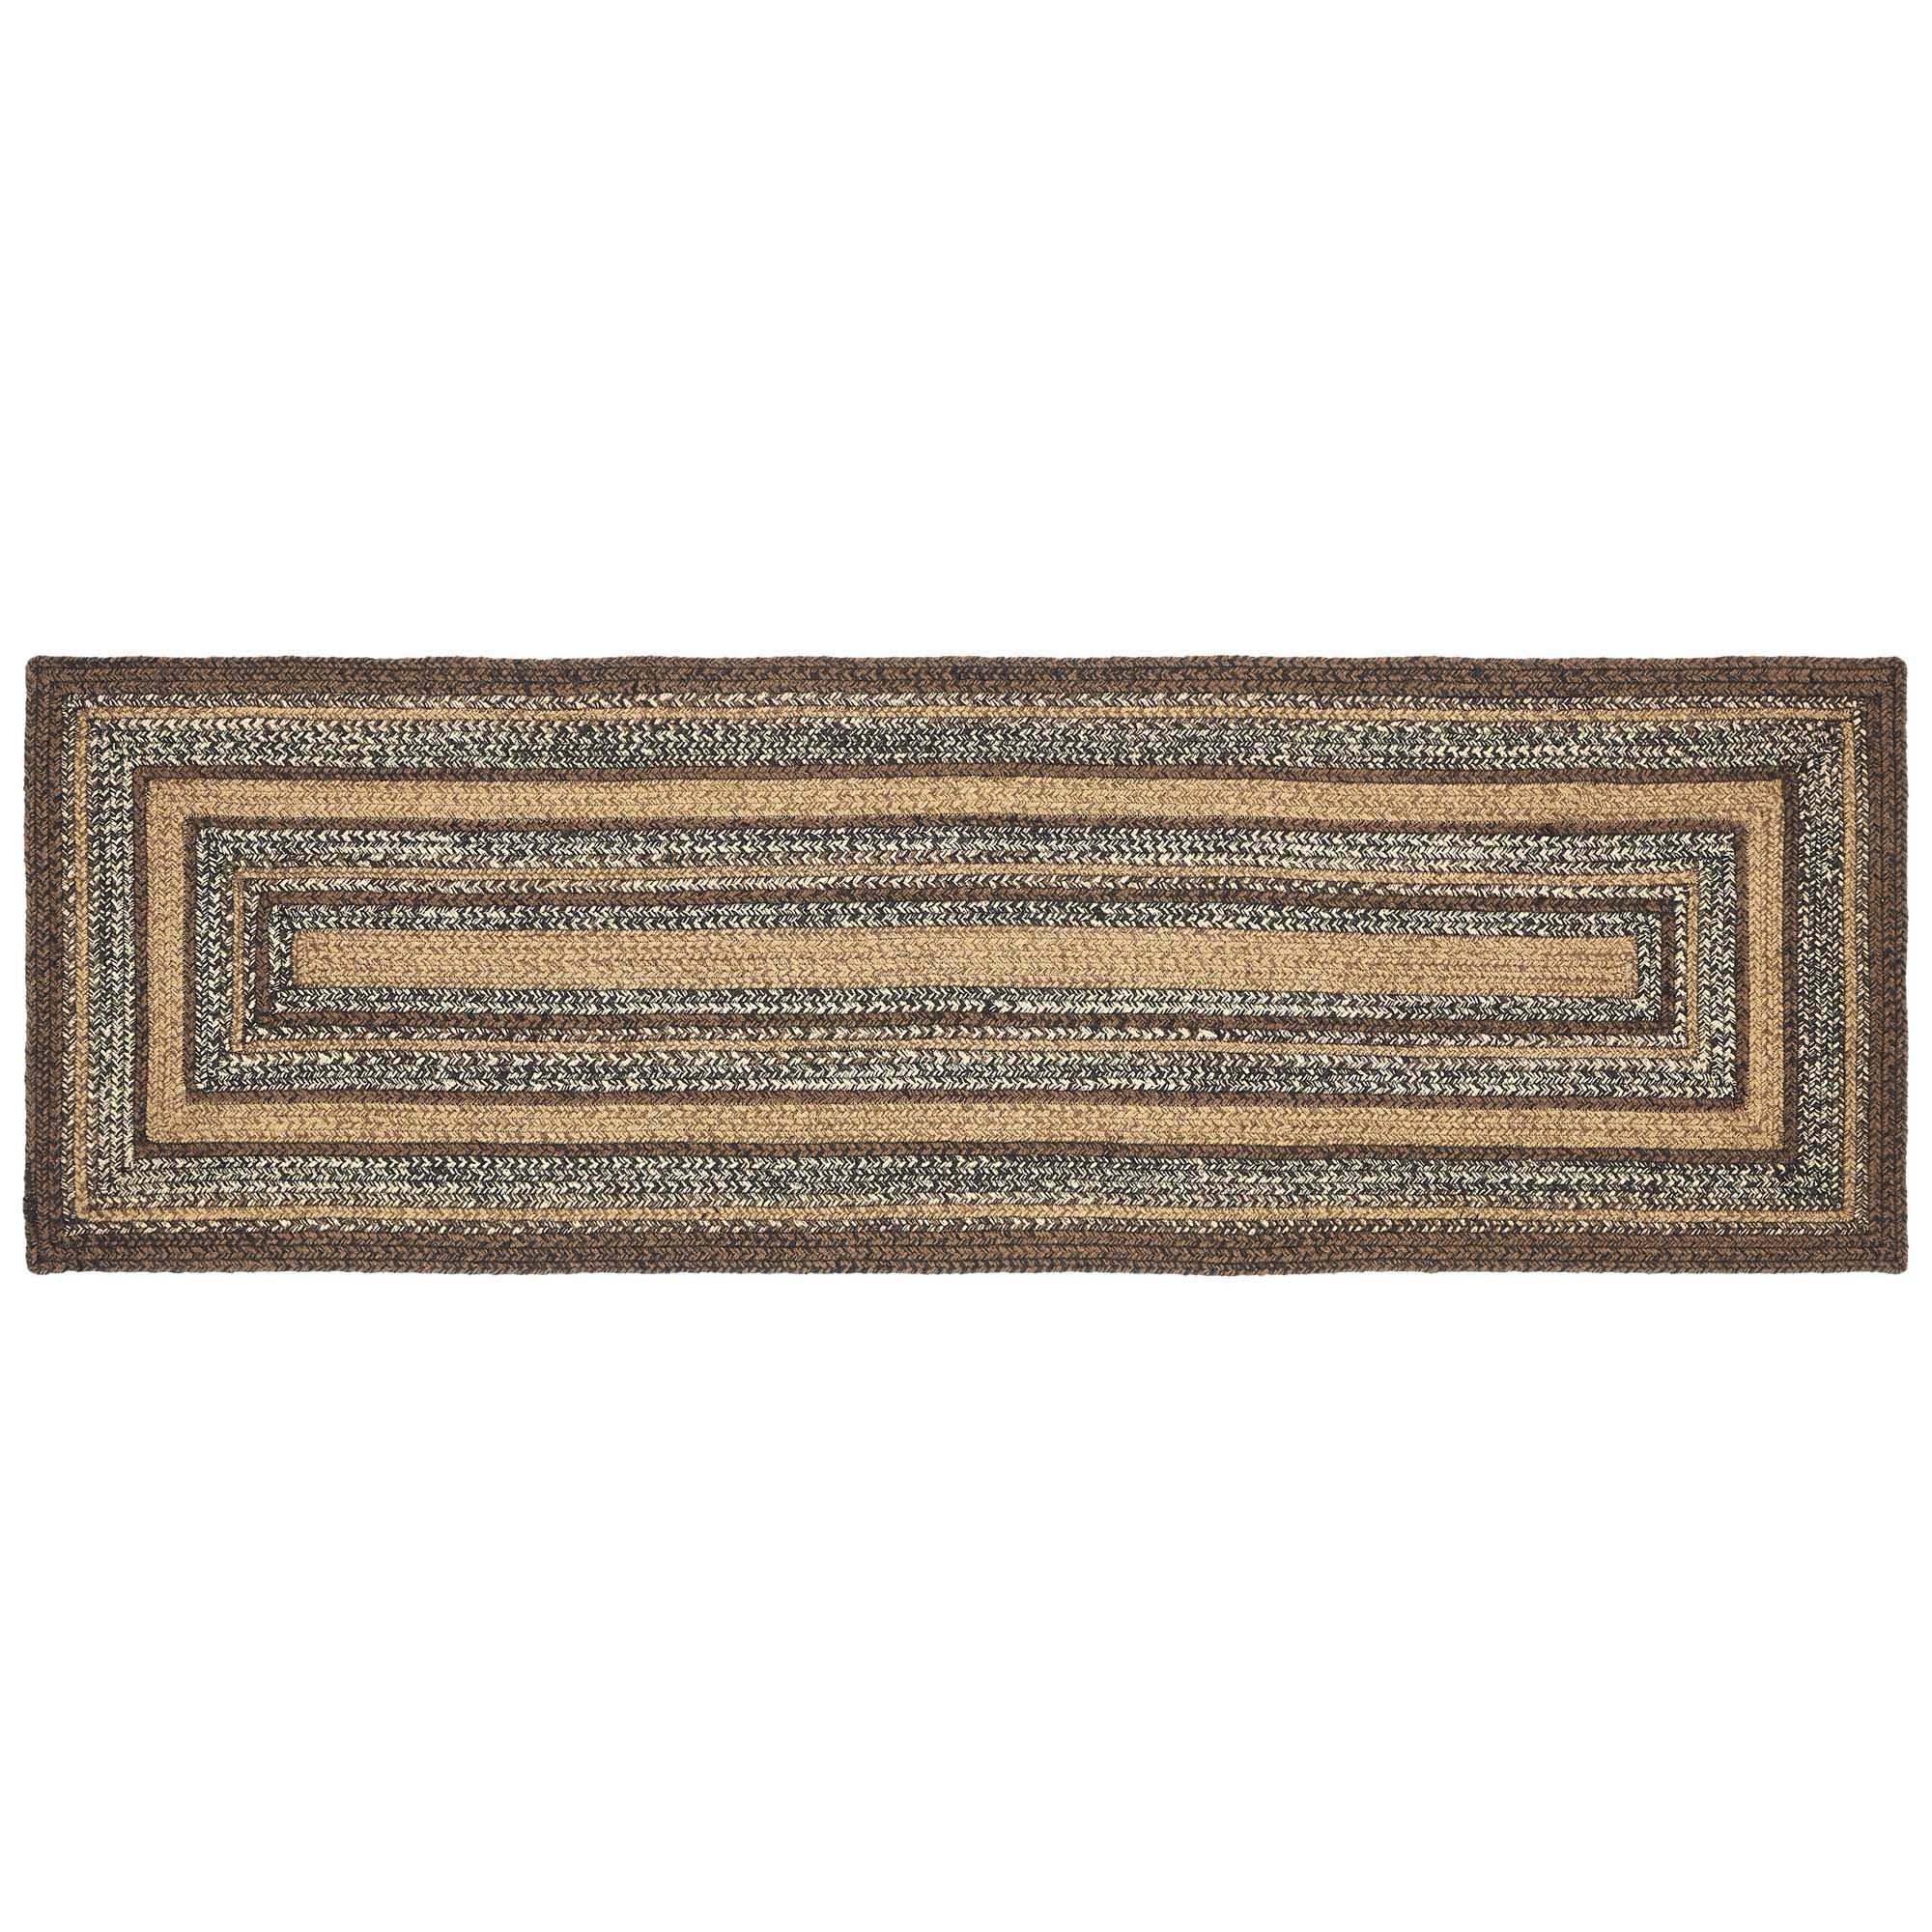 Espresso Jute Braided Rug/Runner Rect with Rug Pad 22"x72" VHC Brands